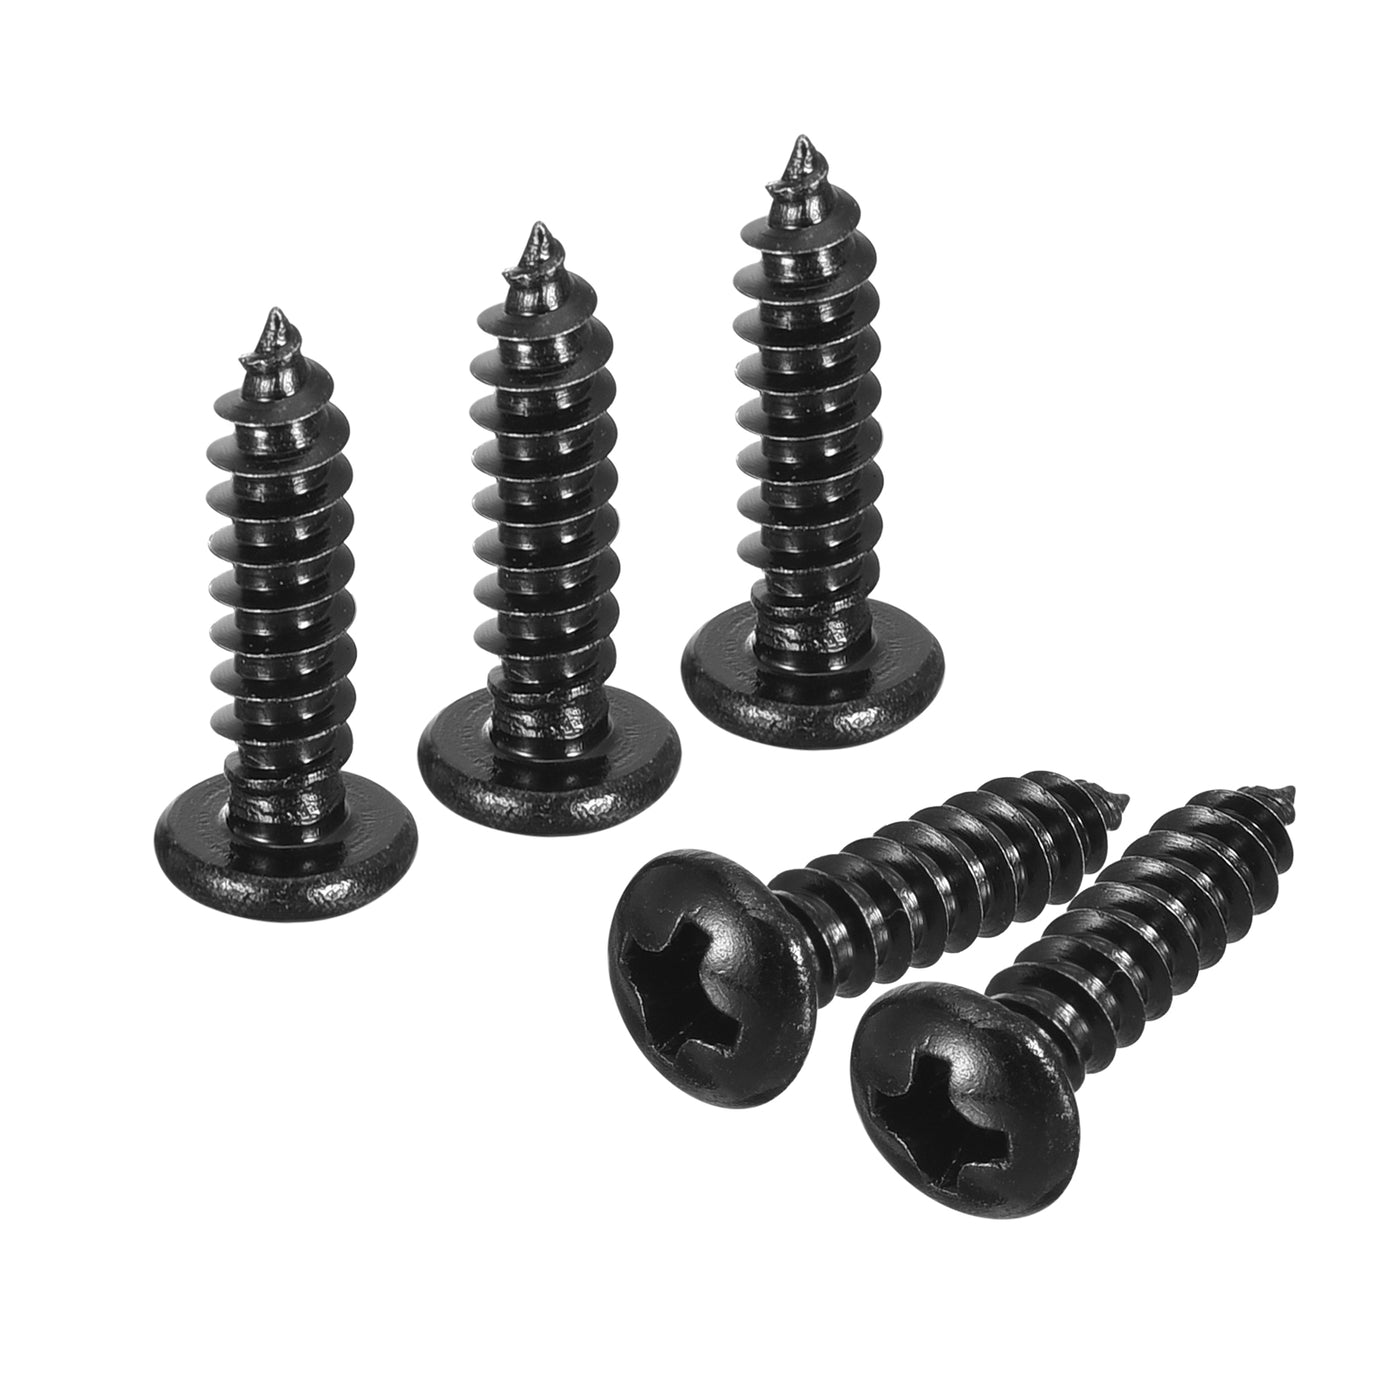 uxcell Uxcell #8 x 5/8" Phillips Pan Head Self-tapping Screw, 50pcs - 304 Stainless Steel Round Head Wood Screw Full Thread (Black)